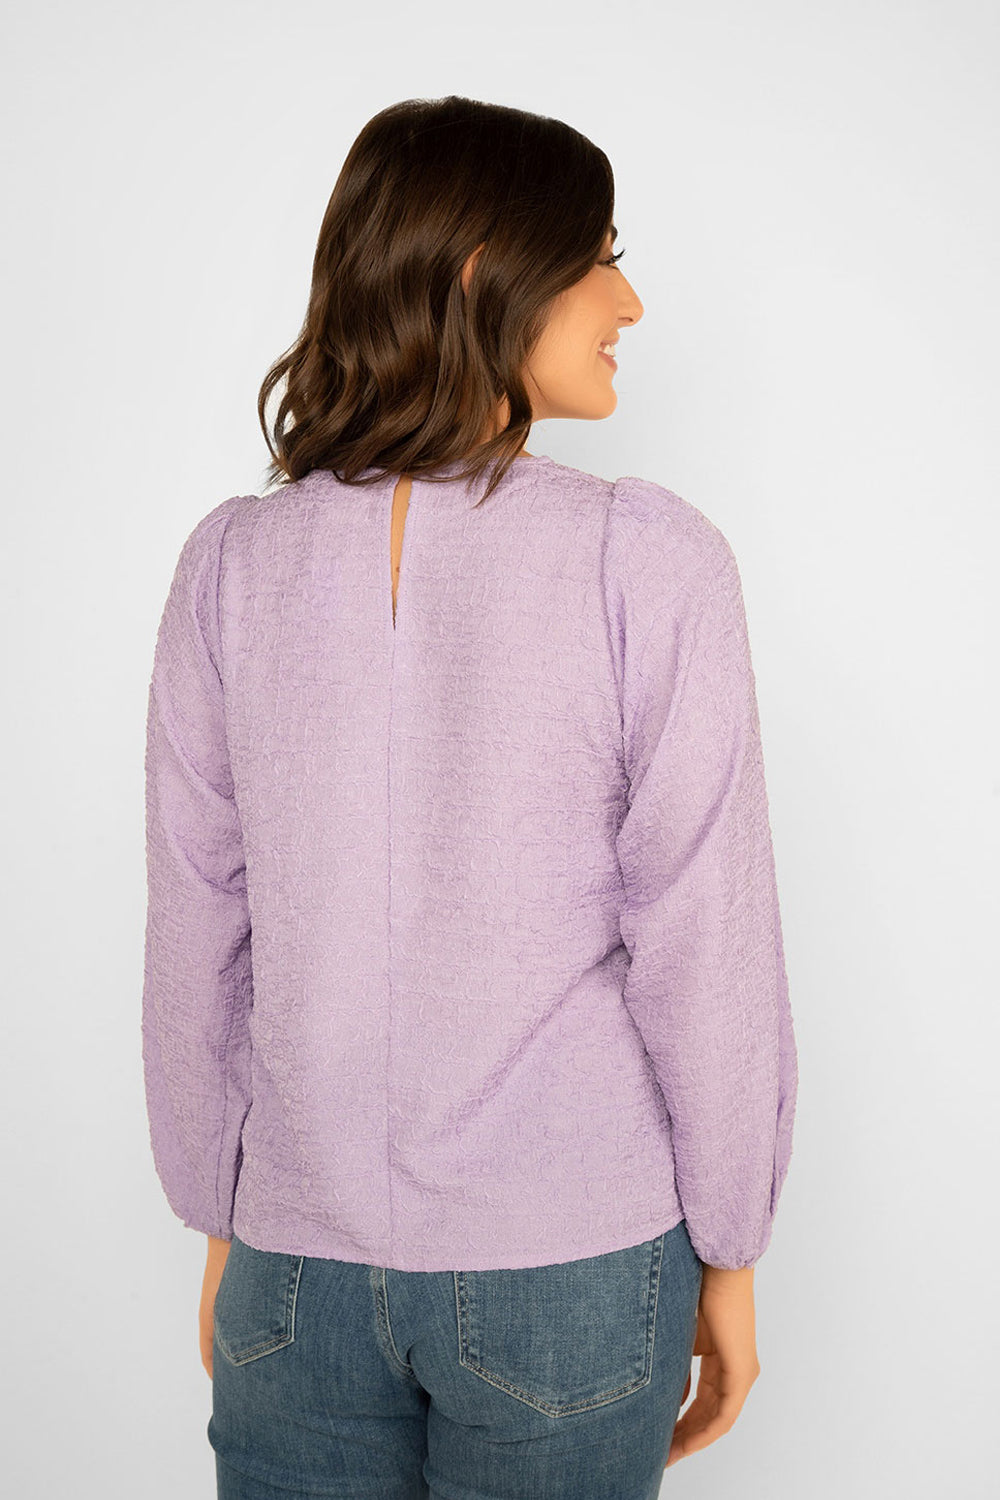 Women's Clothing ESQUALO (F2315520) Long Sleeve Crinkle Blouse in LILAC